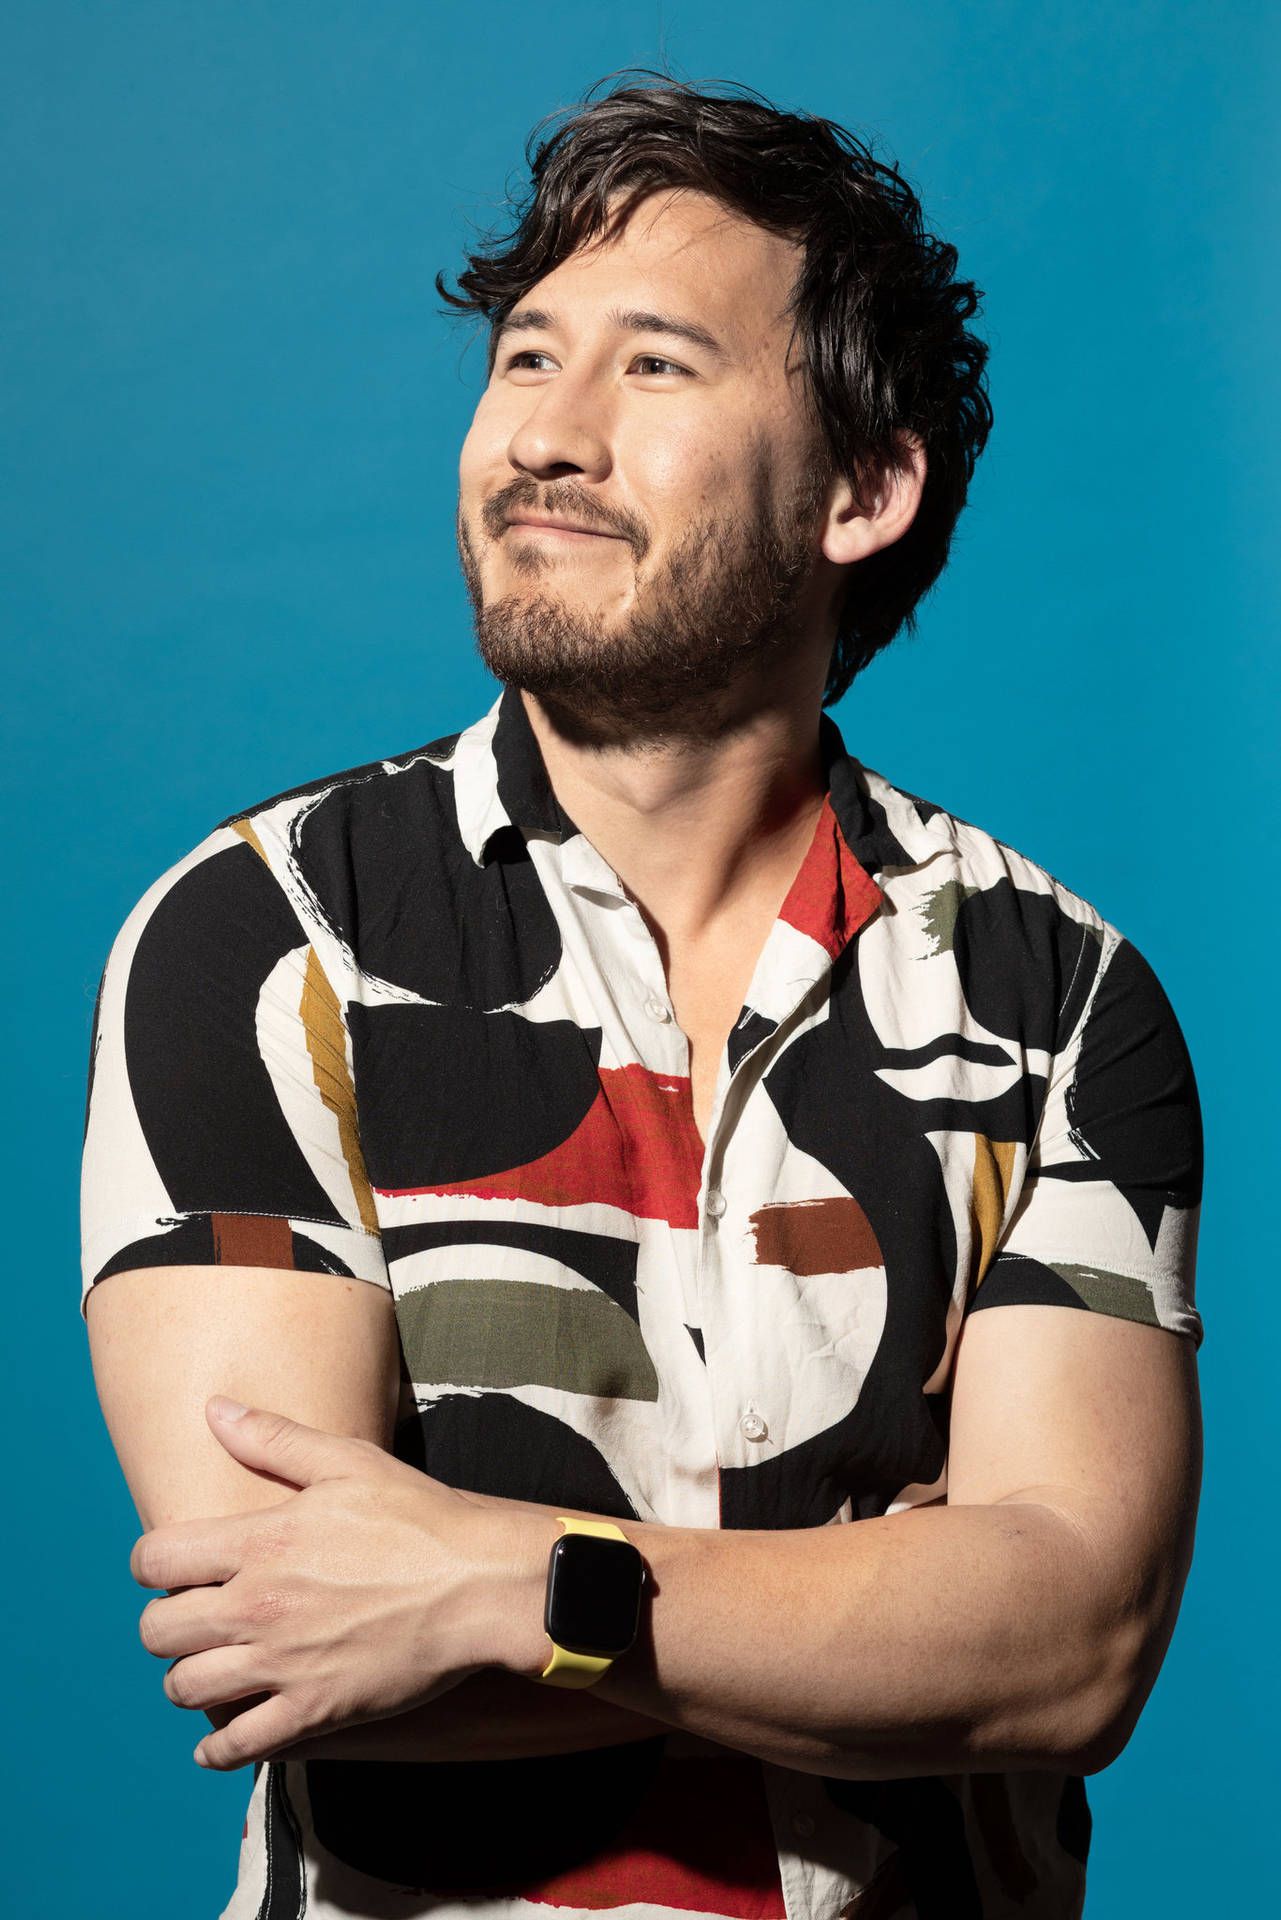 Portrait of man with arms crossed wearing a colorful shirt - Markiplier